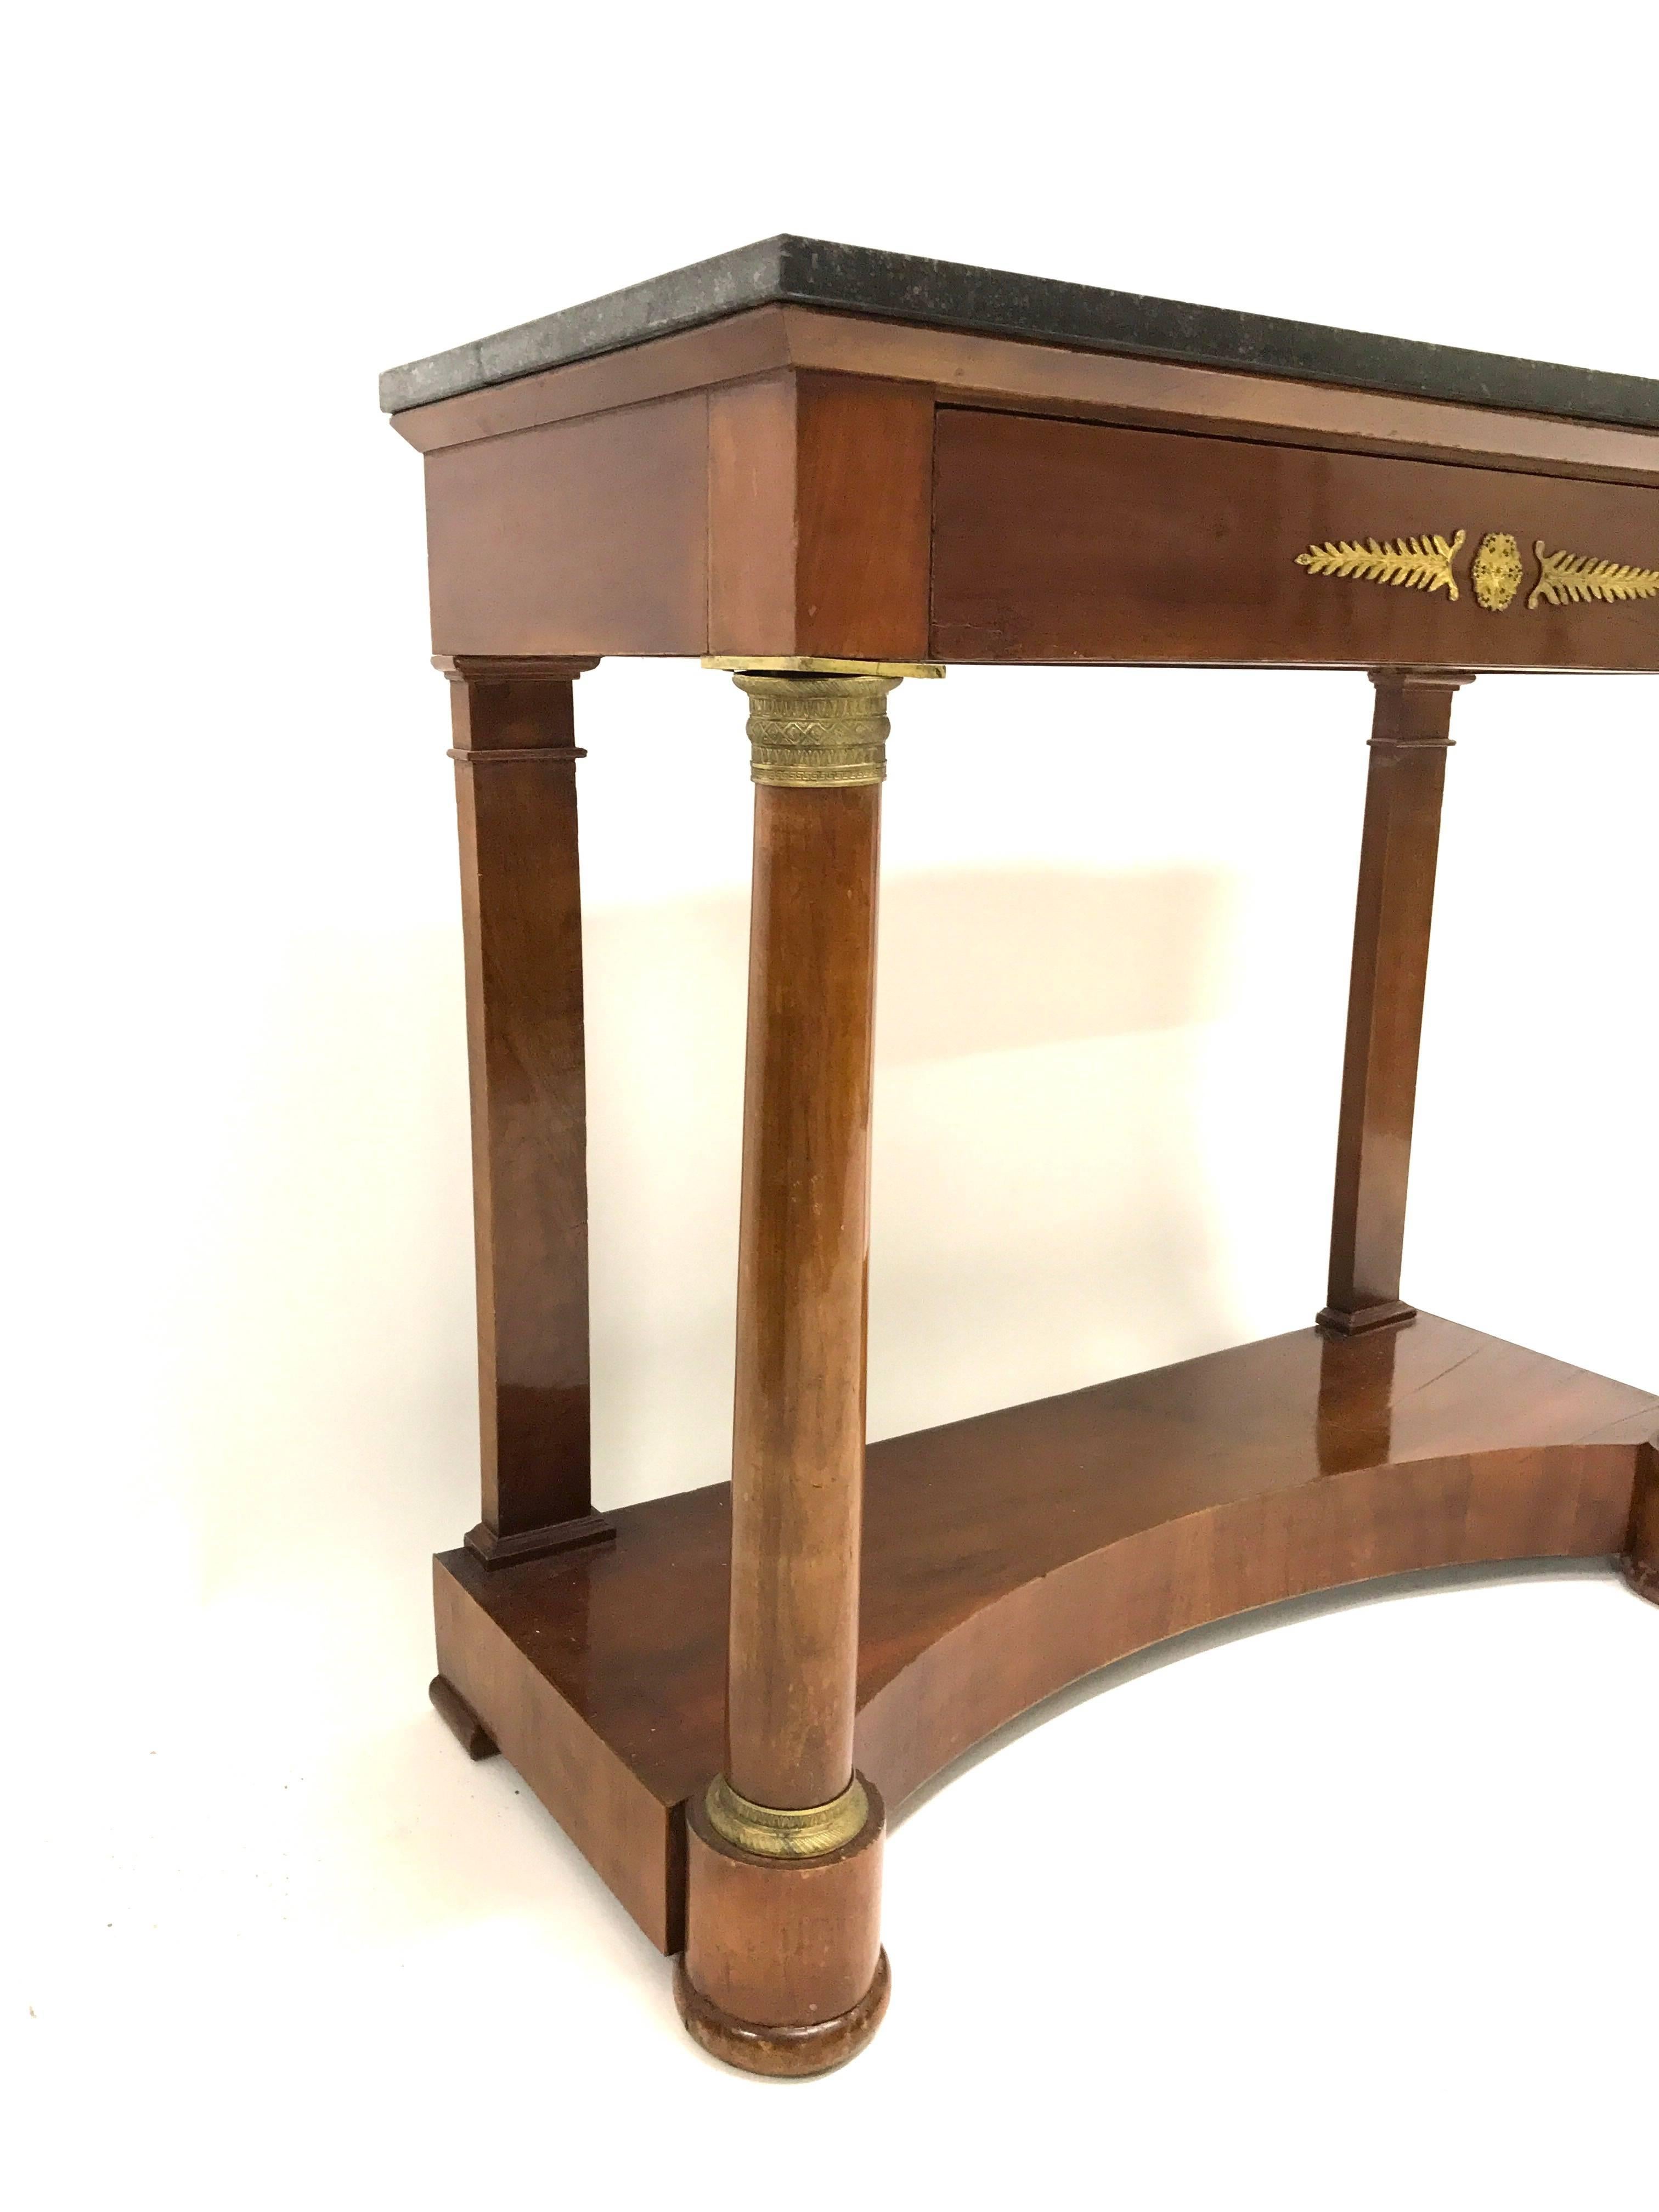 19th century French Empire console table with a marble top.